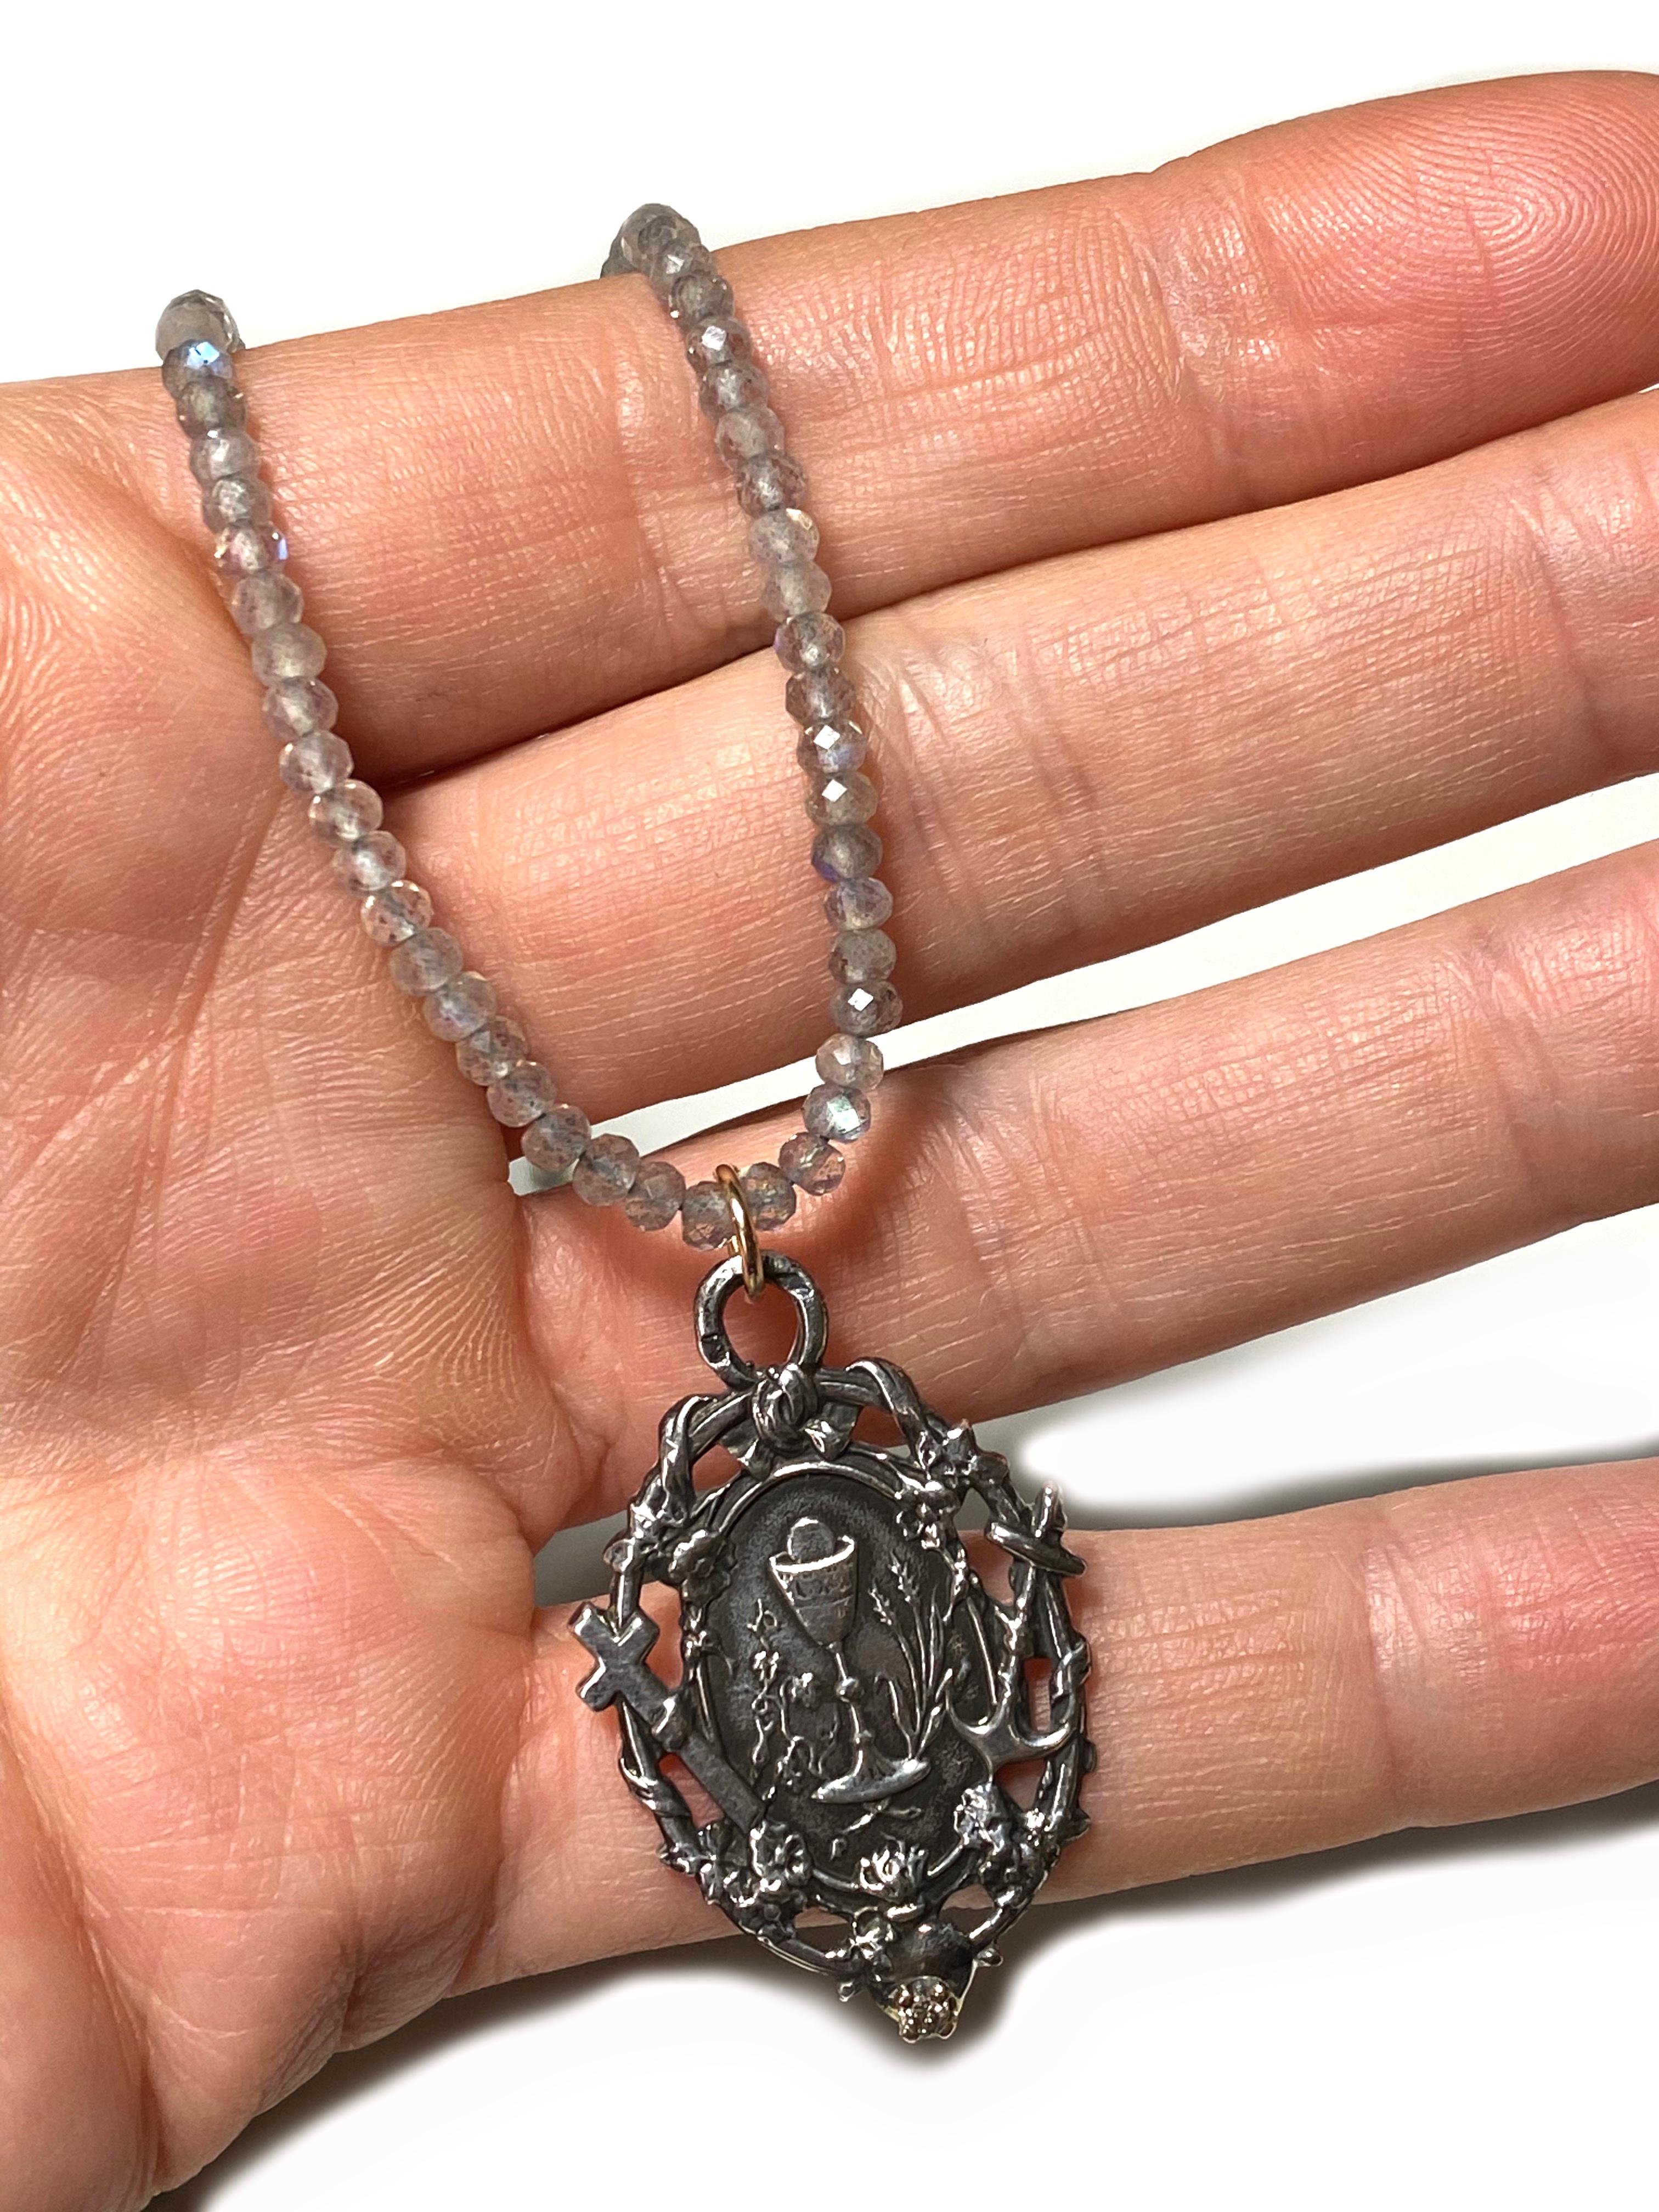 White Diamond Medal Faith Hope Love Sterling Silver Labradorite Bead Necklace

Labradorite bead Love Faith Hope Medal pendant Medal Pendant White Diamond set in a gold prong. Natural Bead Necklace is 18' long but can be made shorter or longer on